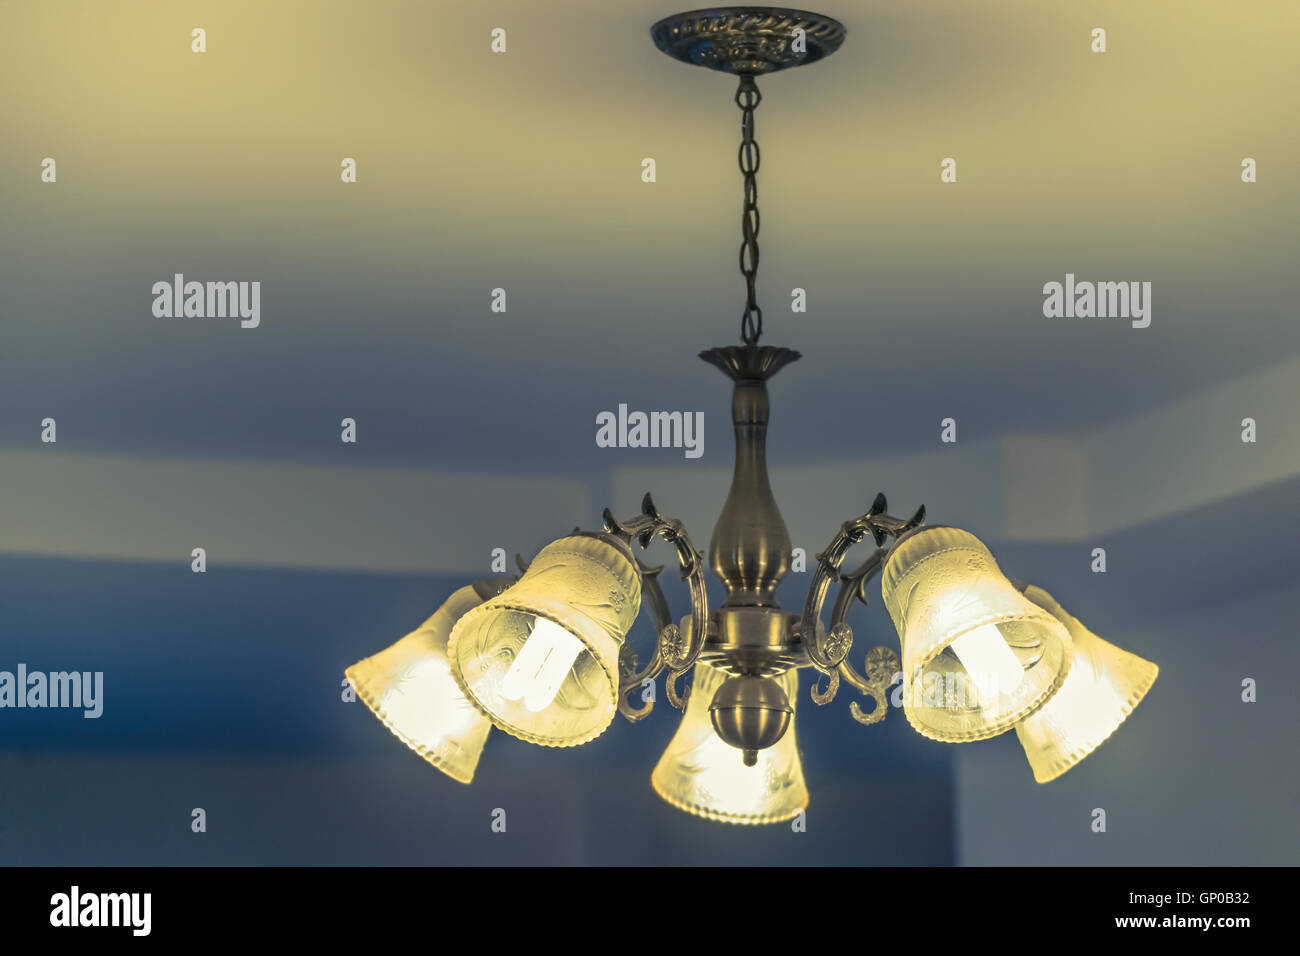 Ceiling lamp for interior decoration, old style celling lamp. Stock Photo